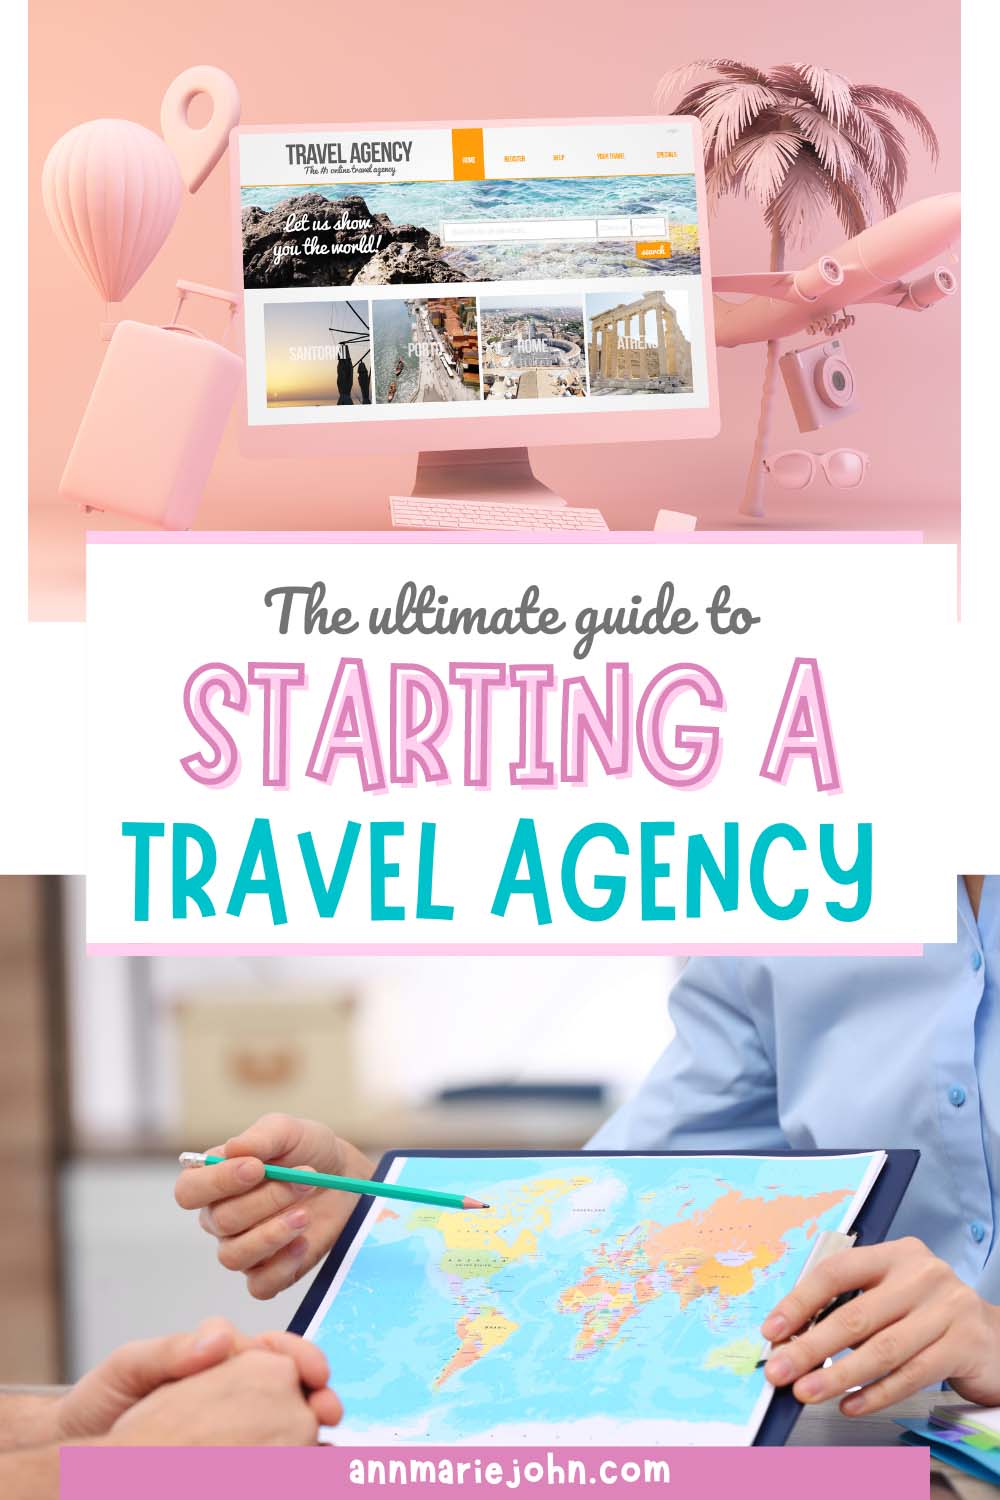 The Ultimate Guide to Starting a Travel Agency